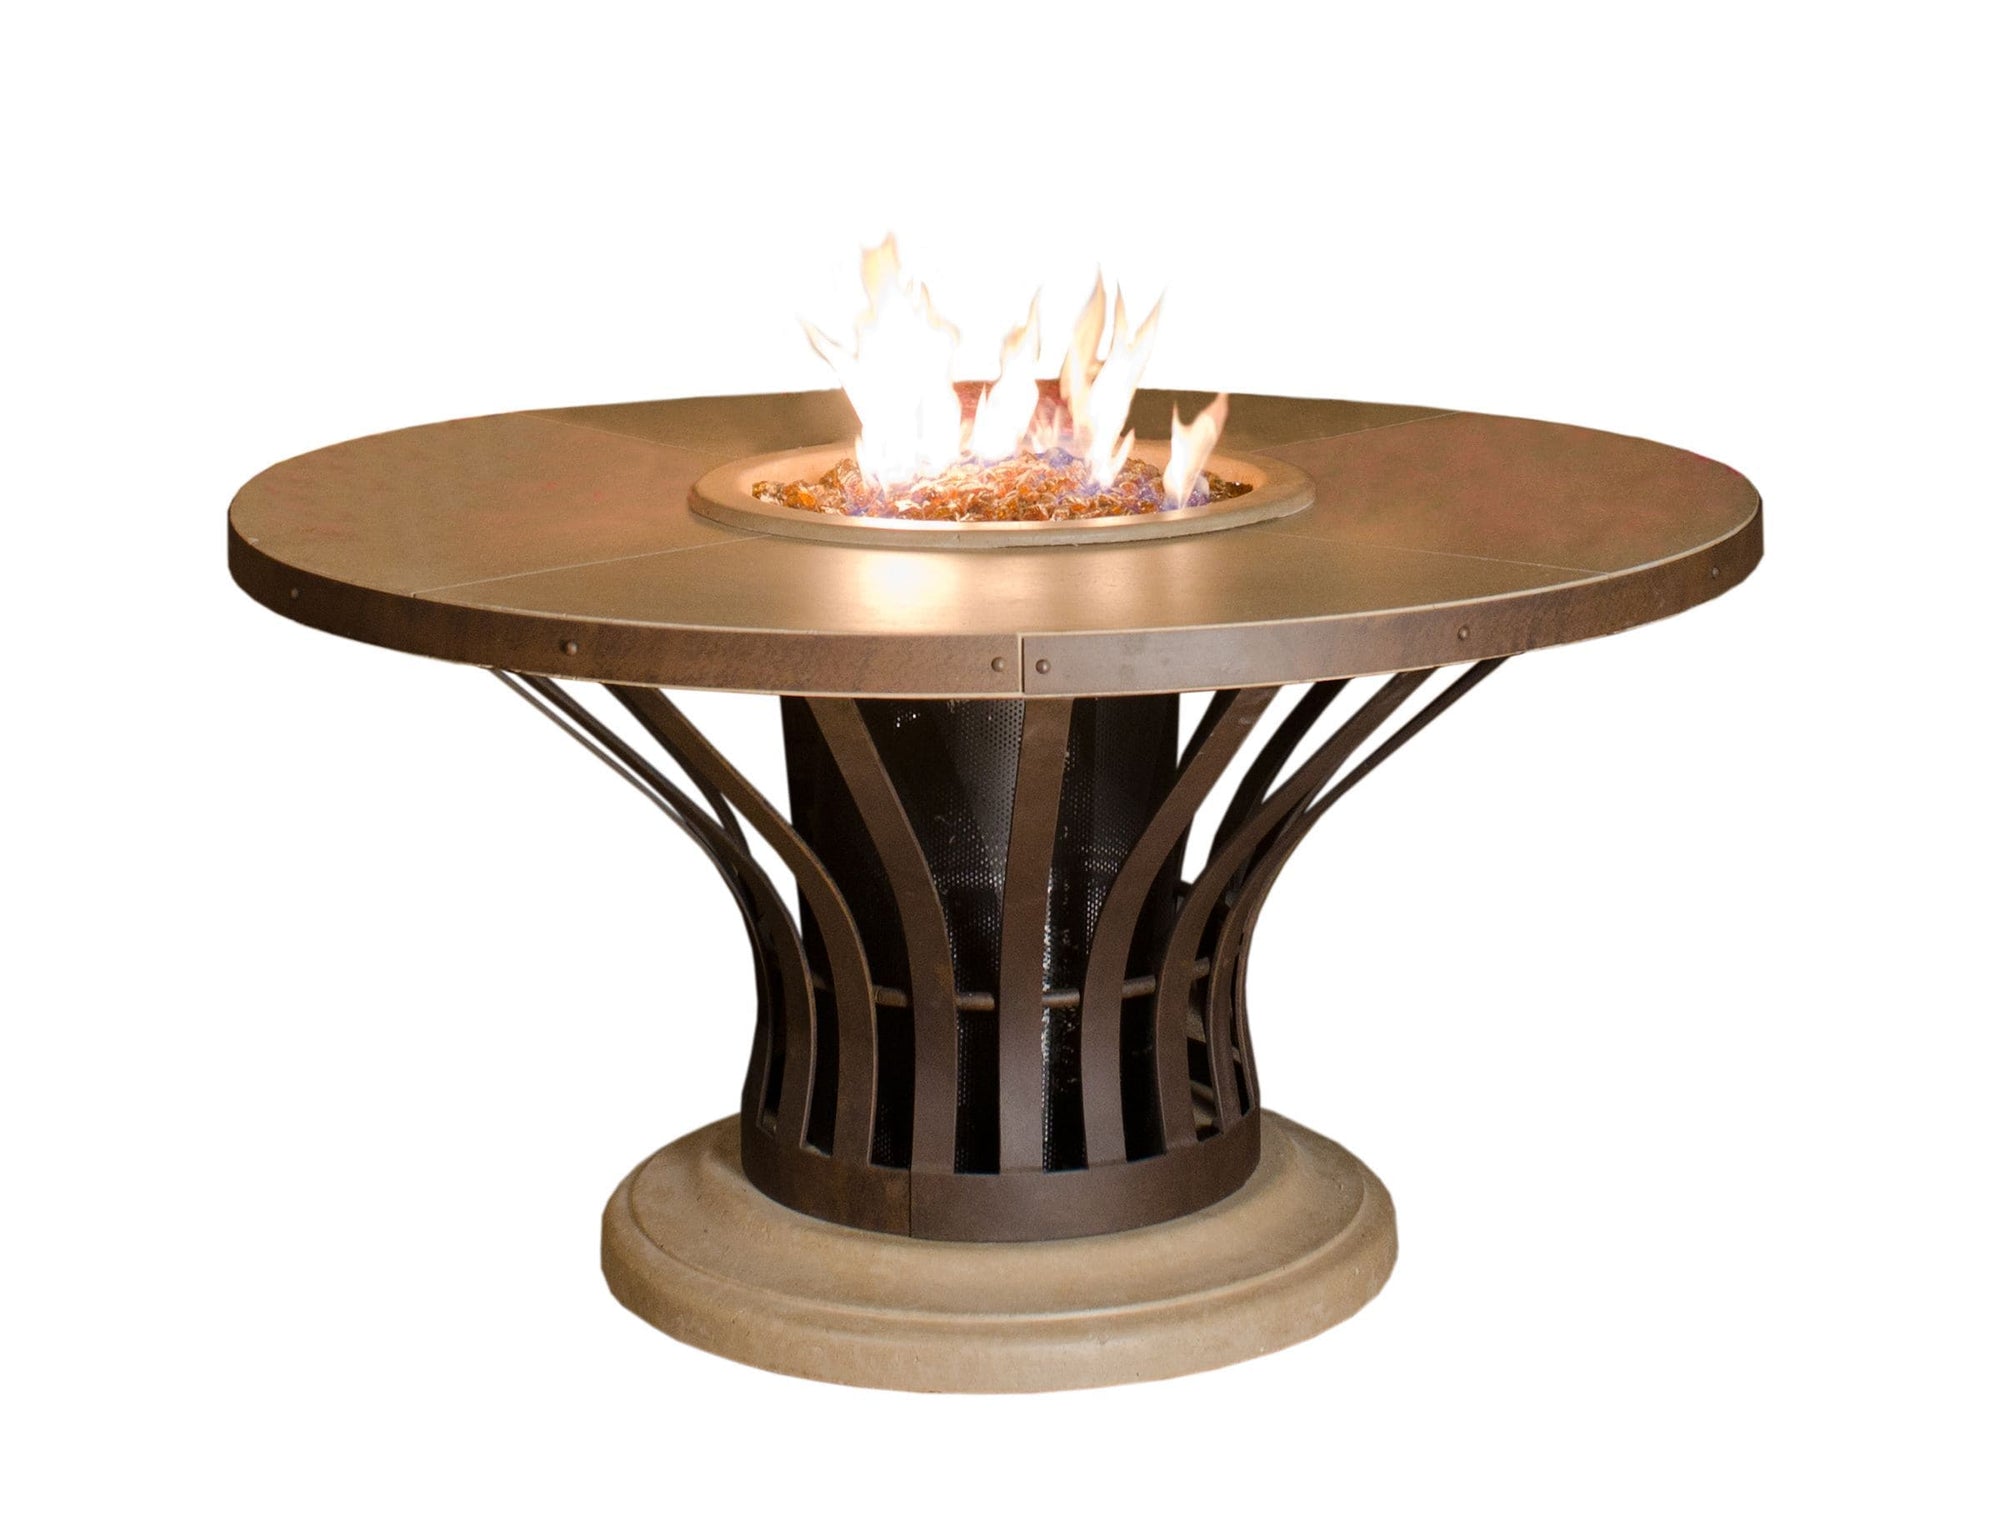 American Fyre Designs Fire Features American Fyre Designs 54" Fiesta Round Dining Gas Firetable / 775-xx-11-M2NC or 775-xx-11-M2PC